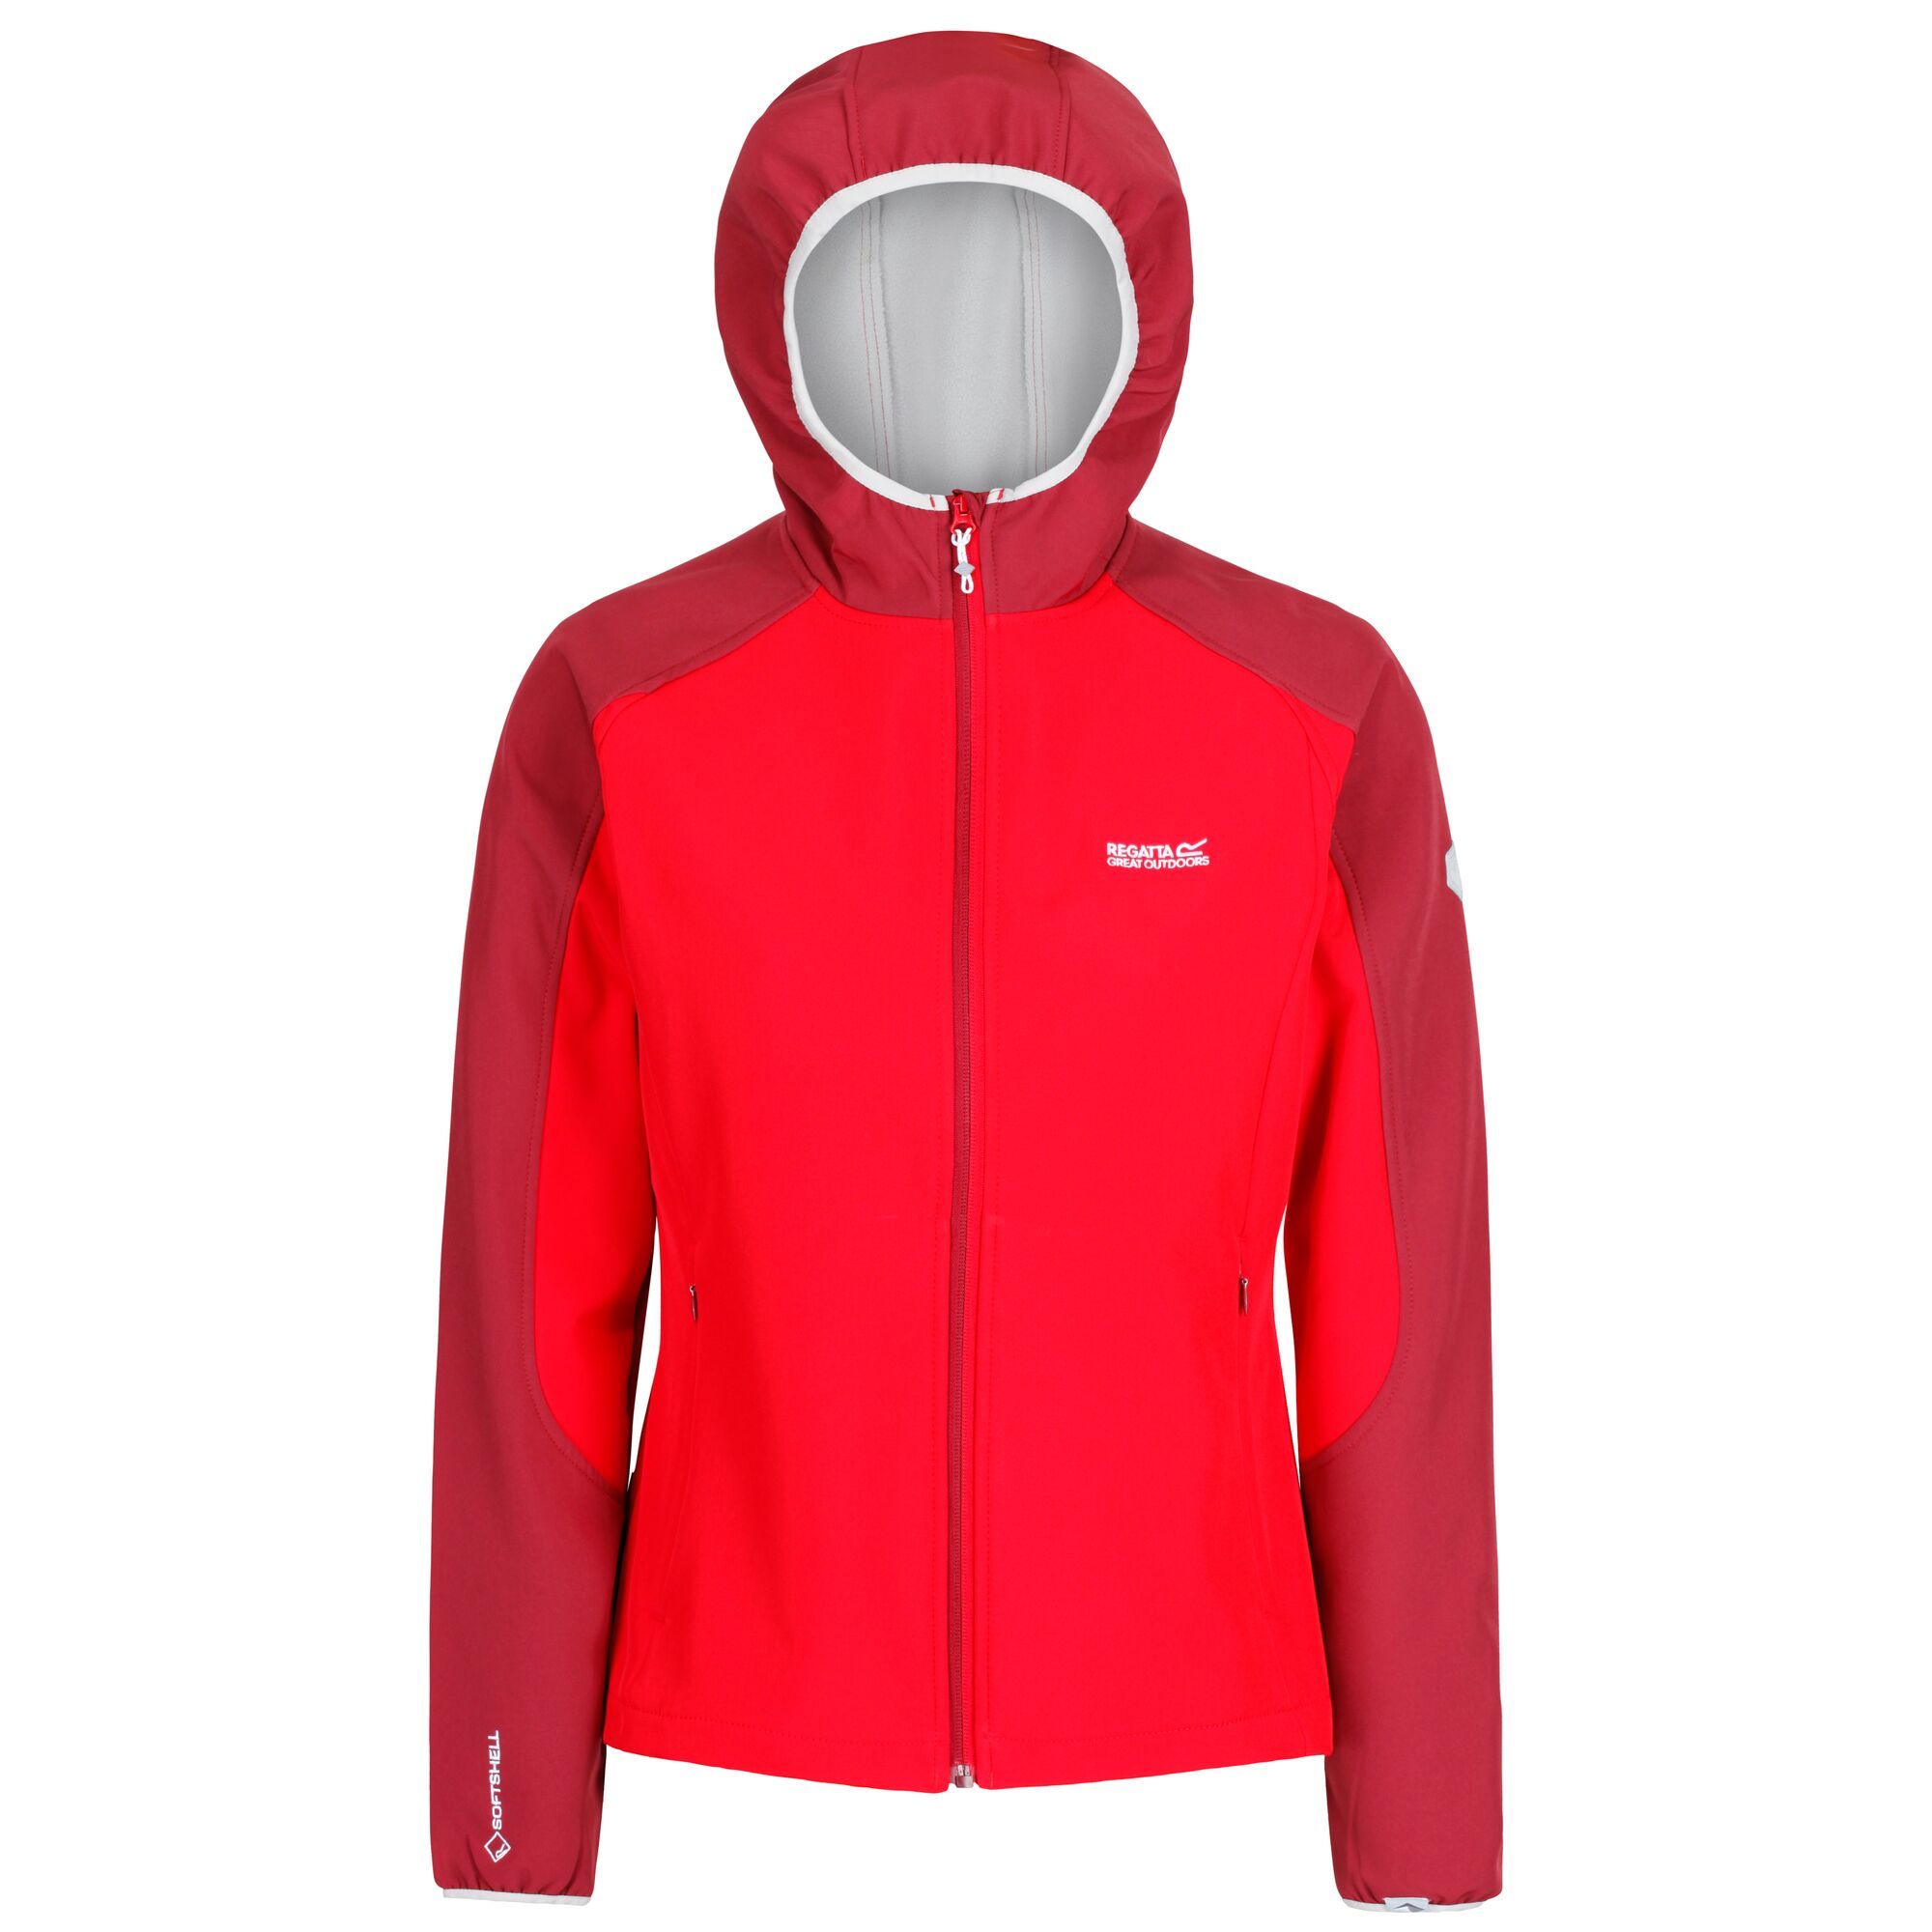 100% Polyester. Streamlined protection for active days at altitude. Technical softshell hoody. Durable and warm. Offers stretch and provides wind and water resistance. Peaked hood with 2 way adjusters. Stretch binding cuffs and hem. Zipped pockets.